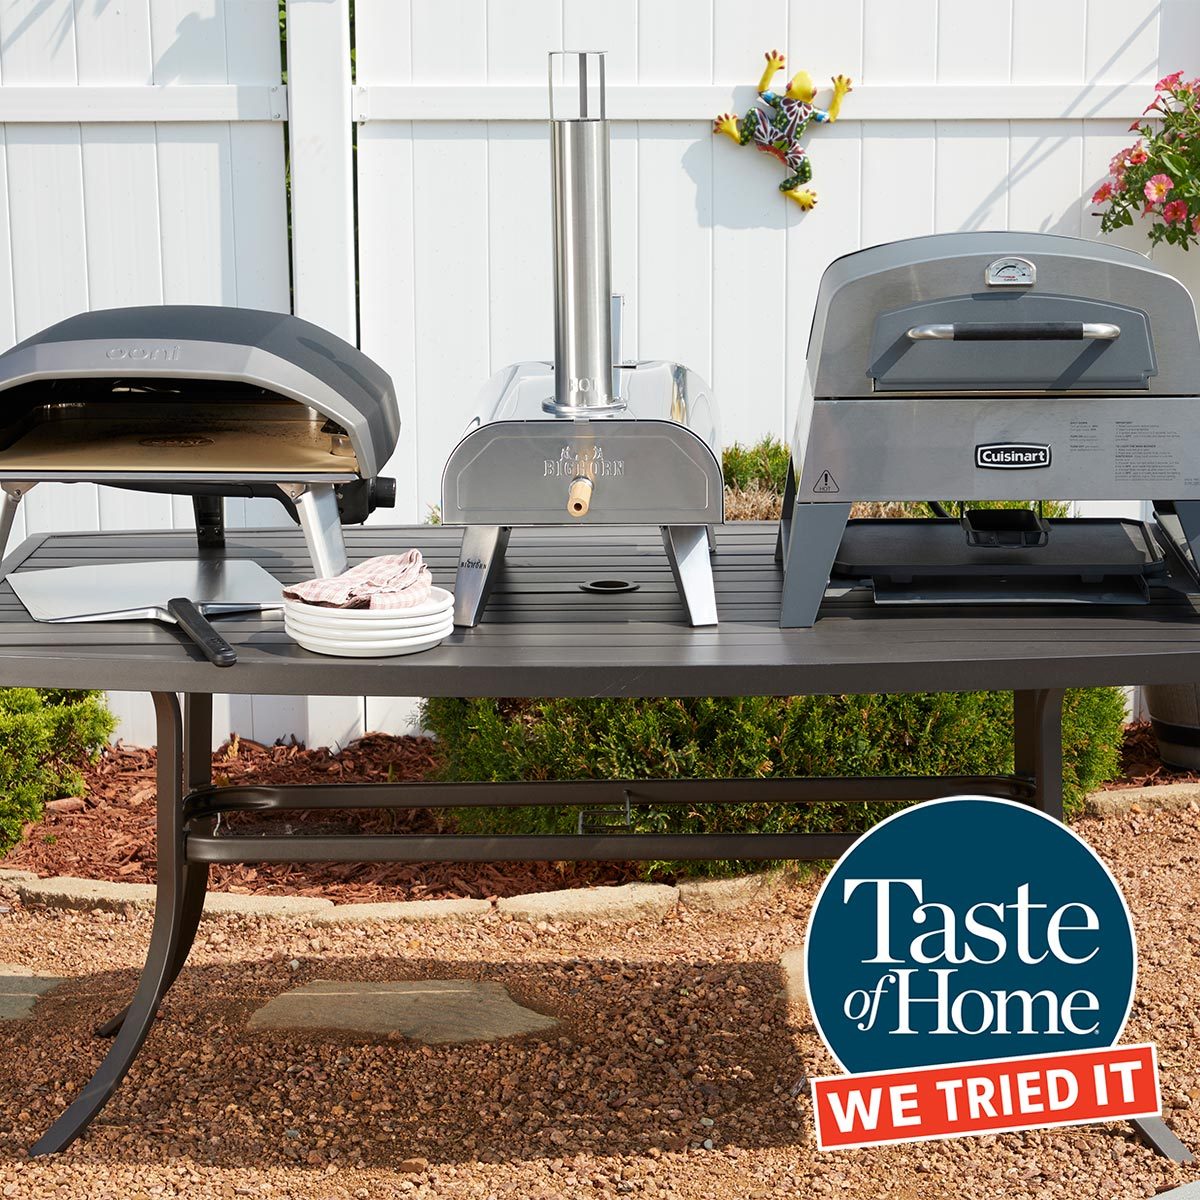 The Flip Grill - Patio & Pizza Outdoor Furnishings